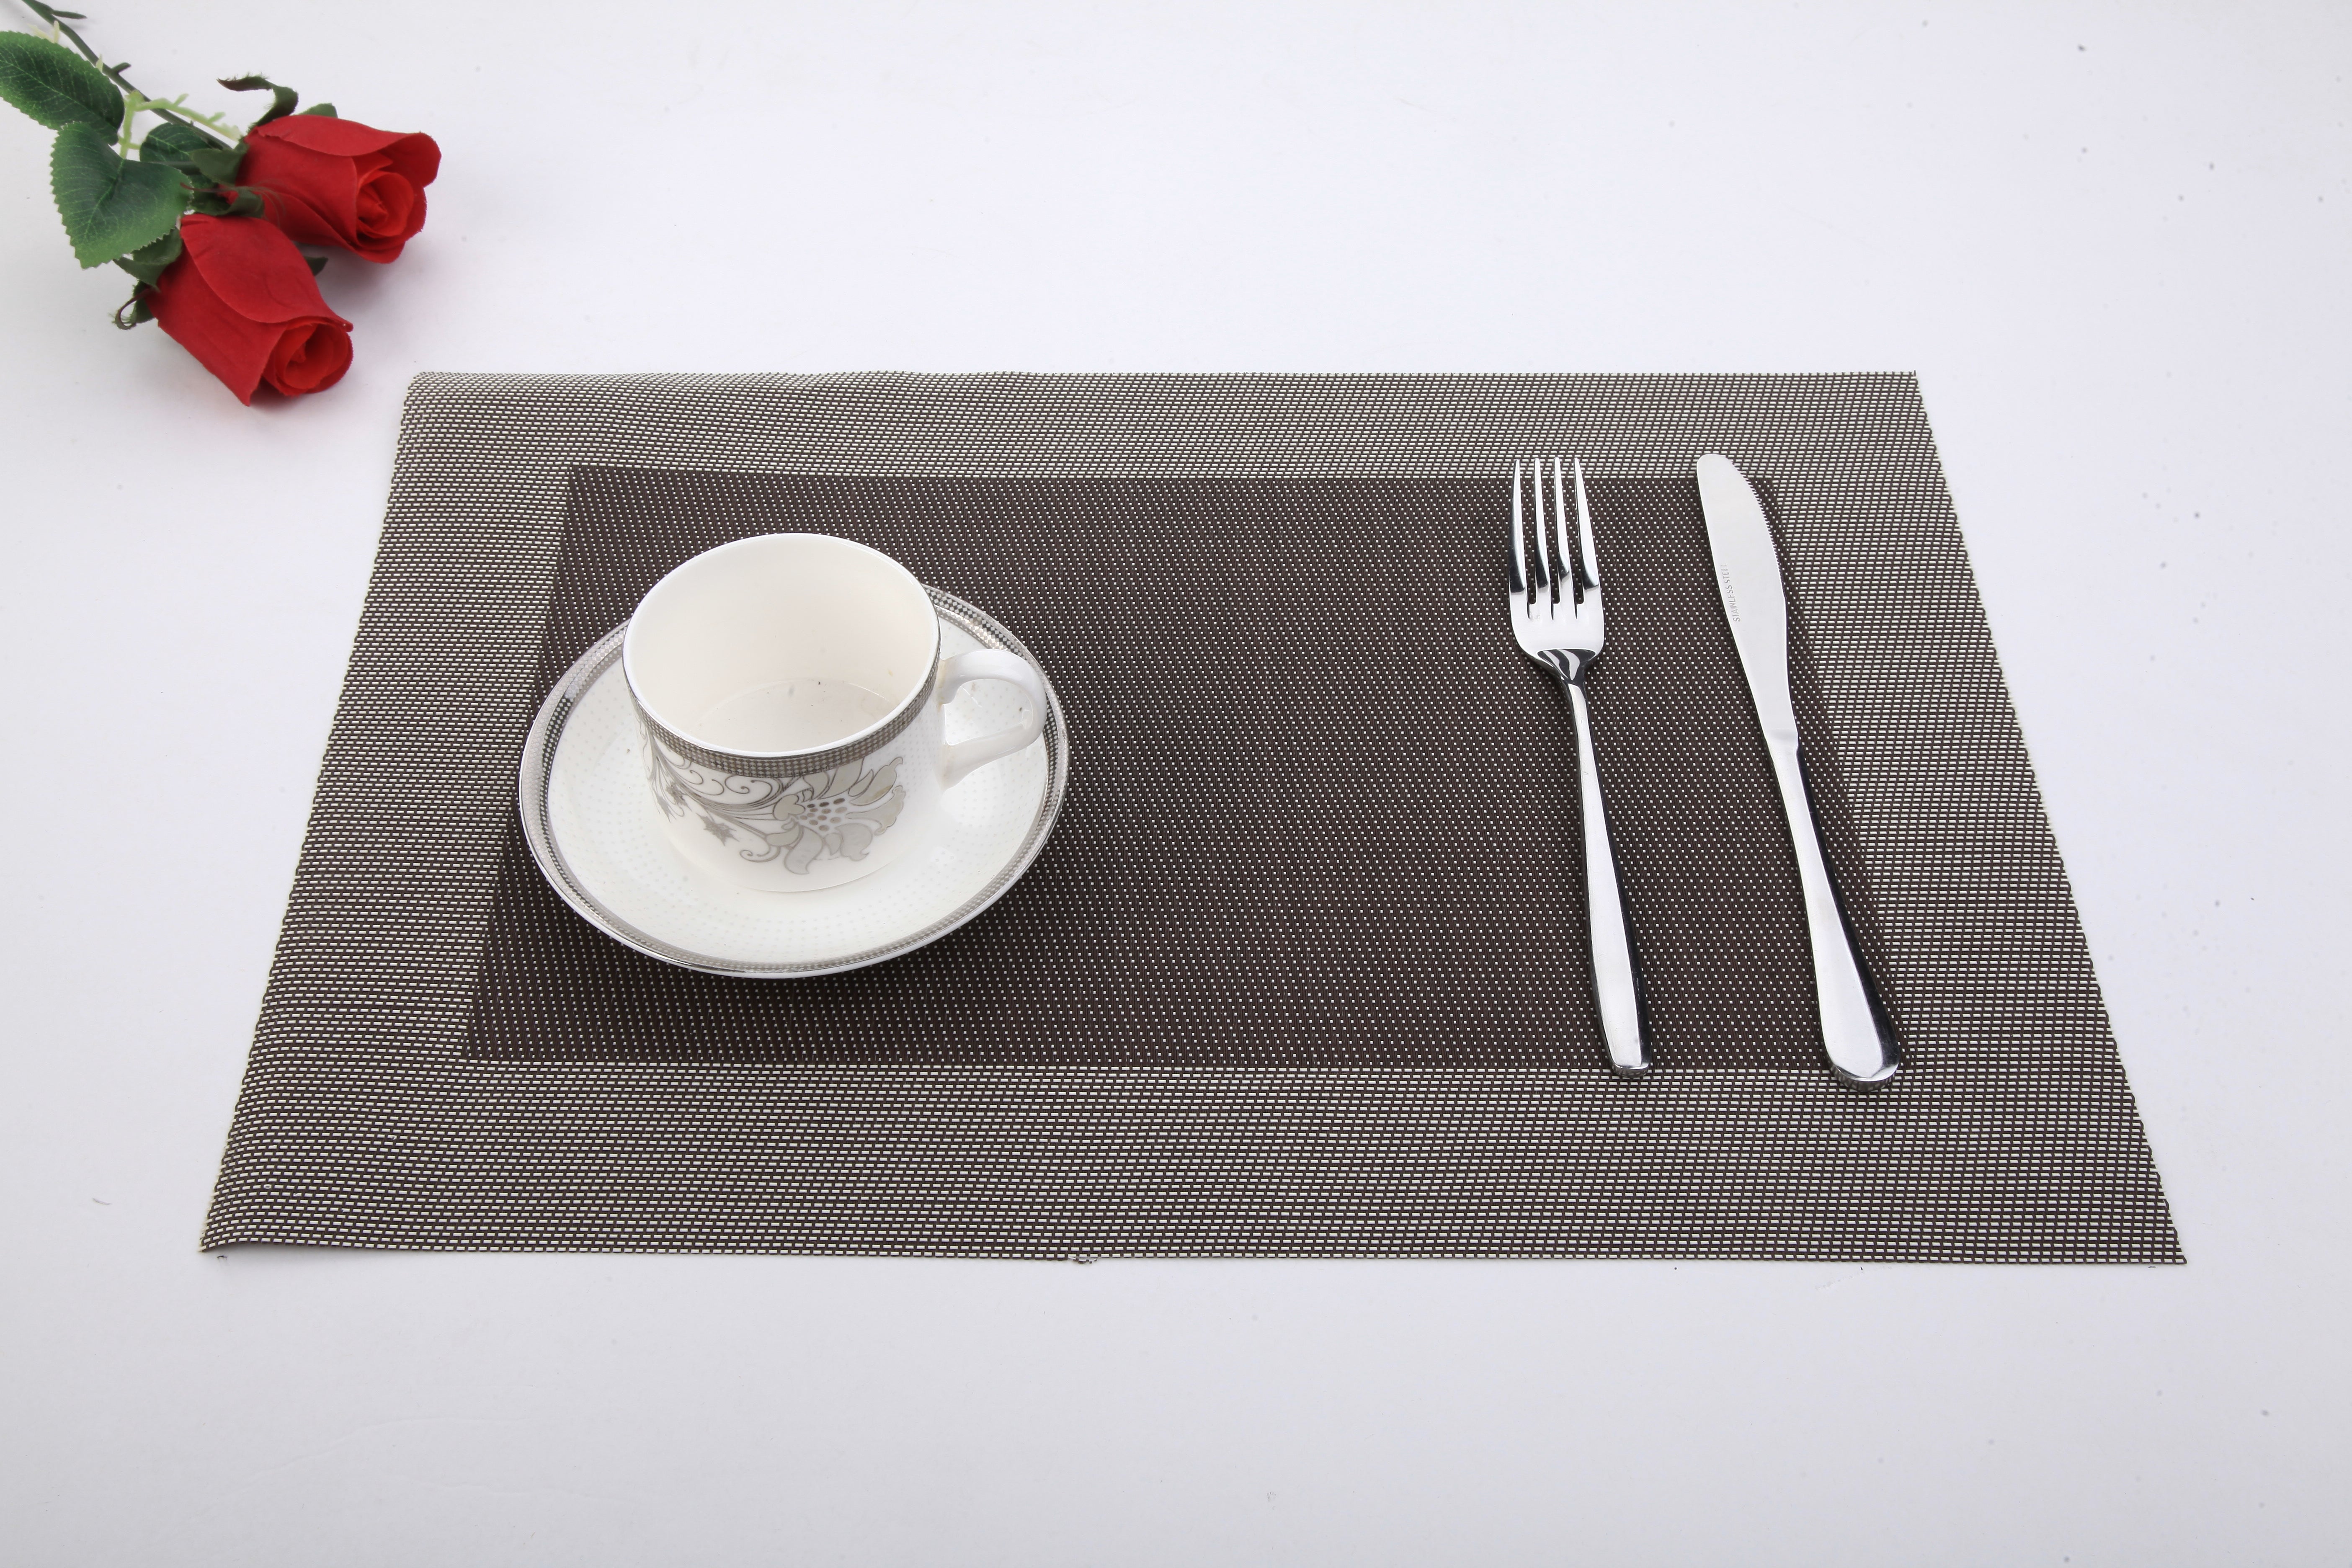 Set of 4 - 12" x 18" In. Woven Non-Slip Washable Placemats